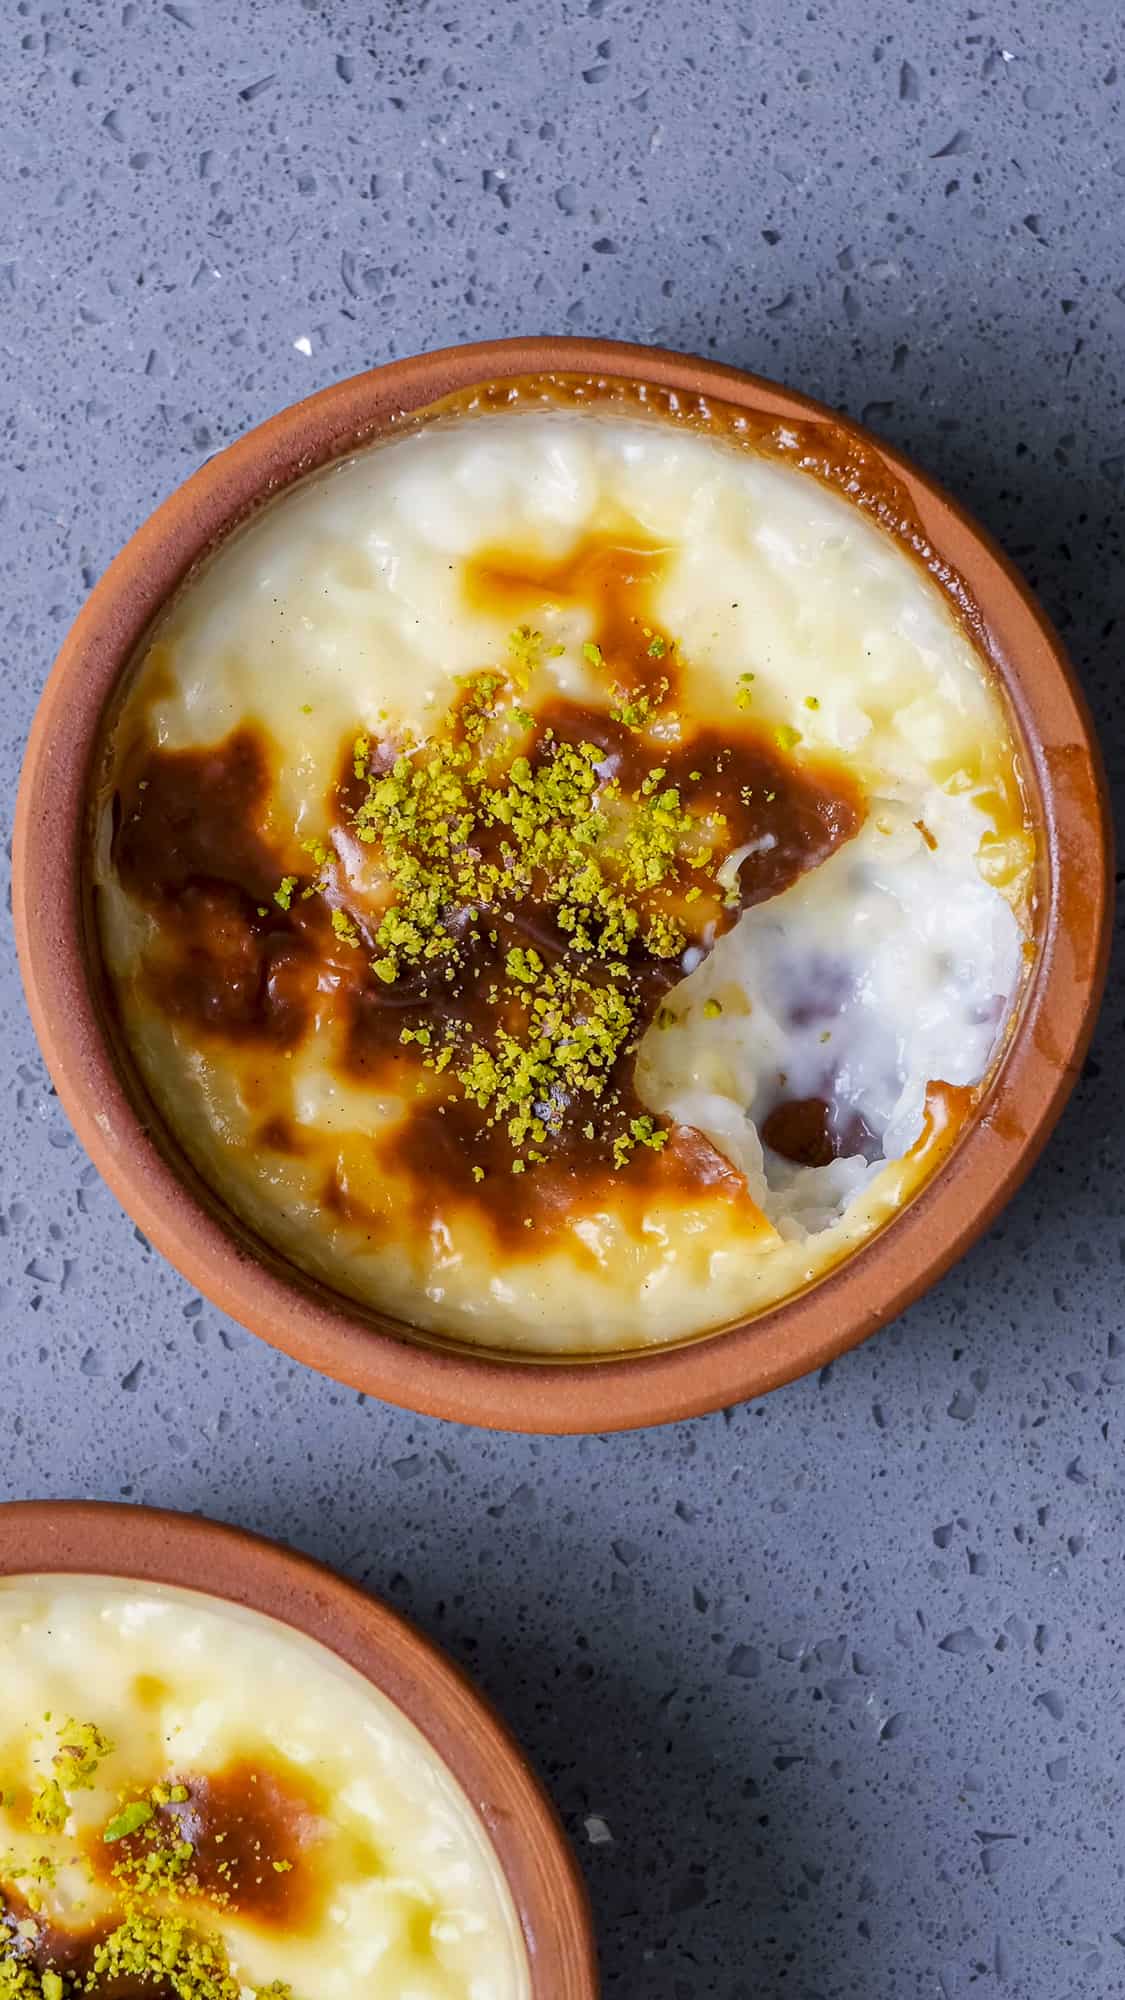 Rice pudding with a golden top in a clay pot.